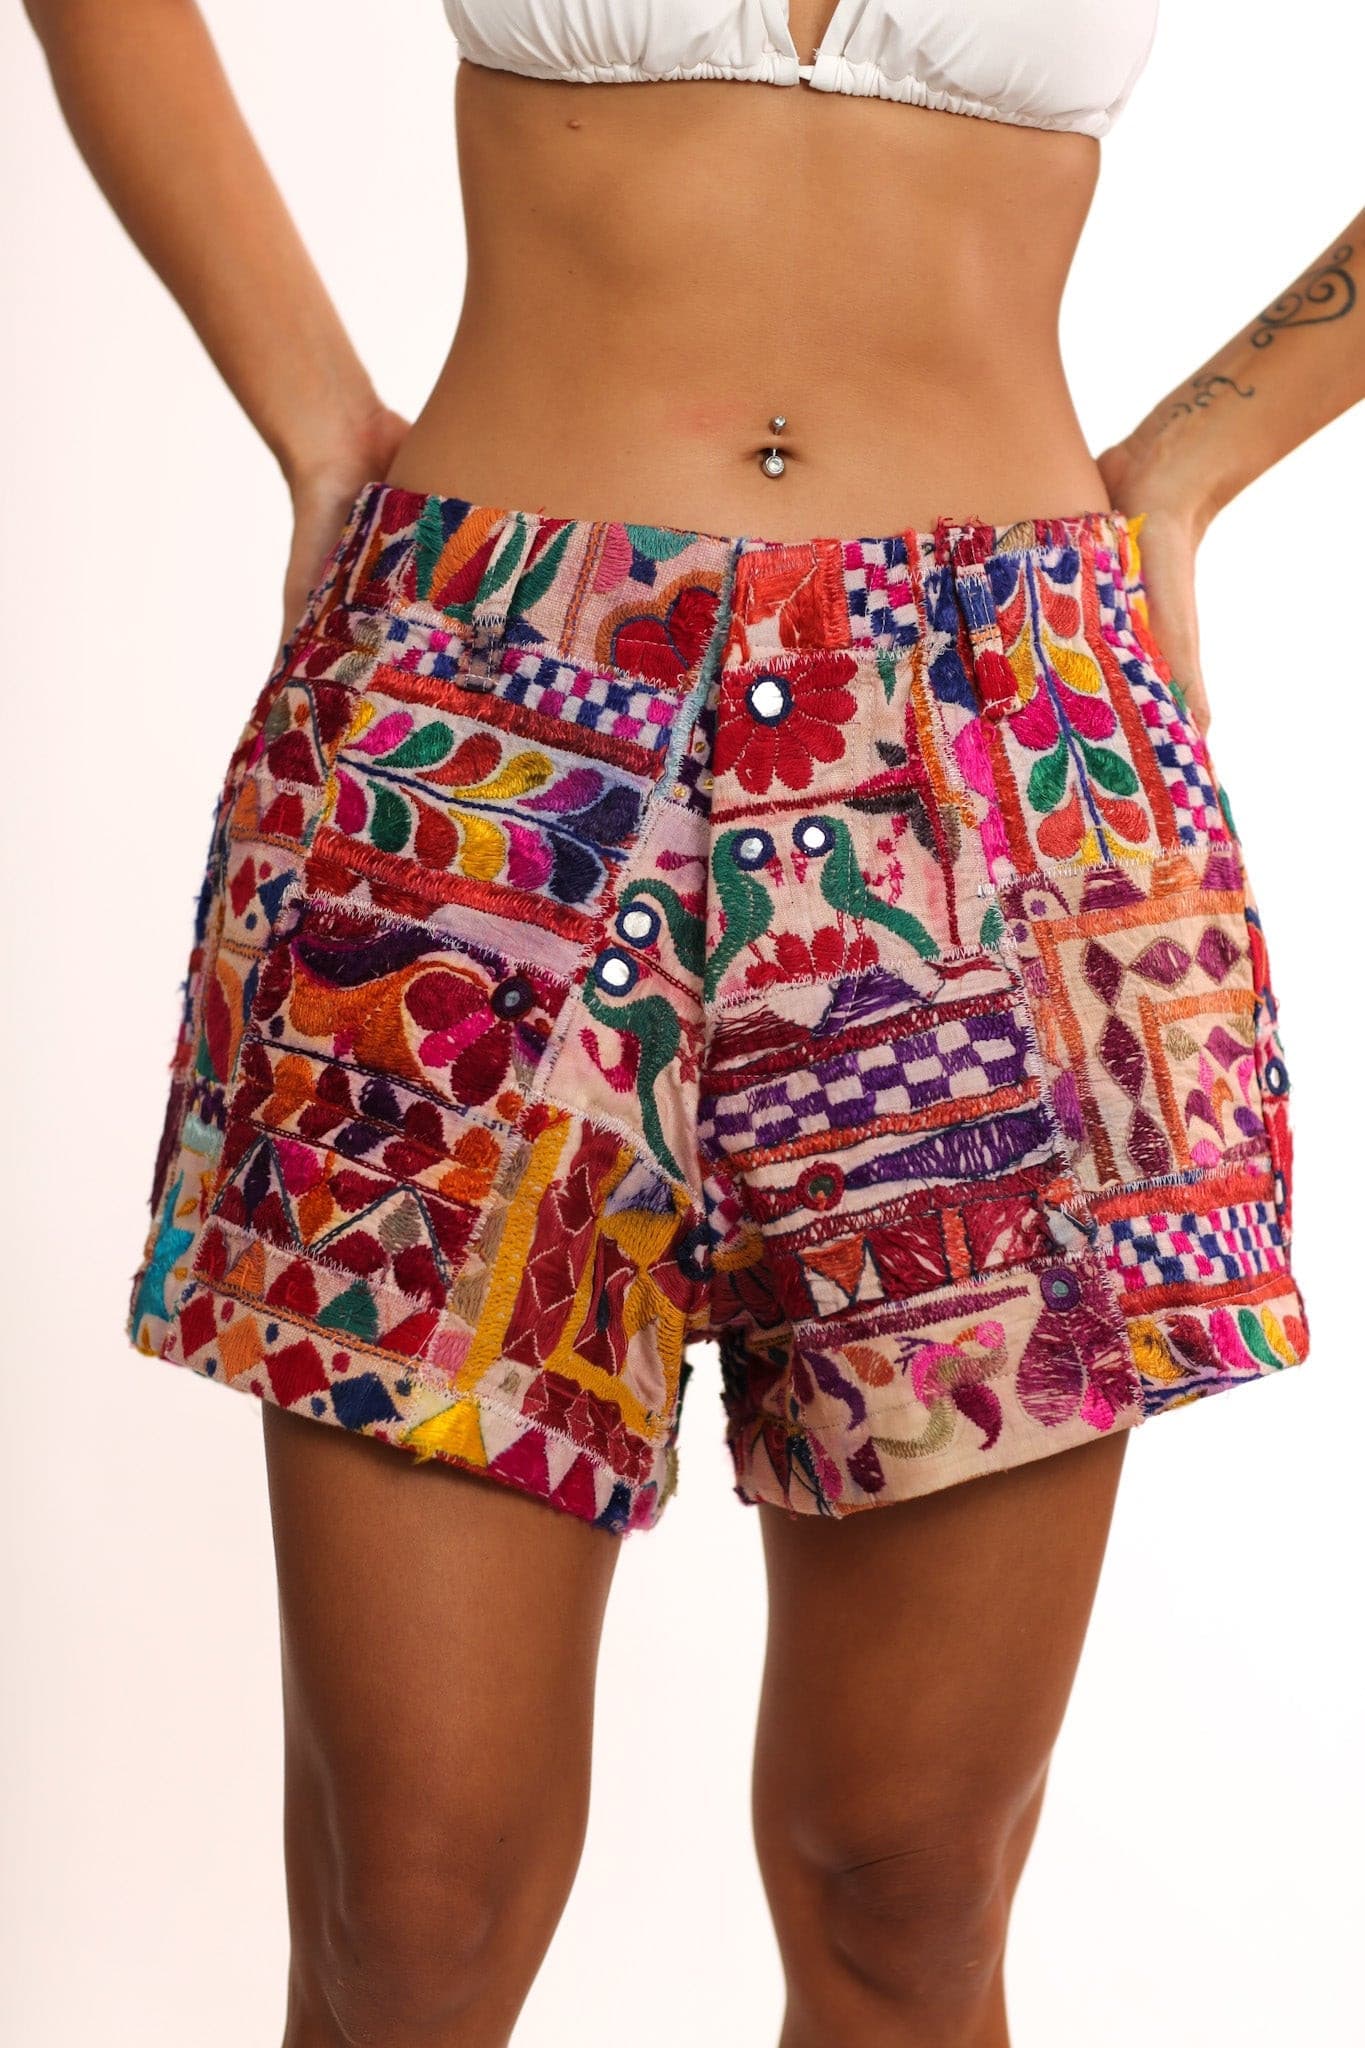 EMBROIDERED PATCHWORK SHORTS X FREE PEOPLE - BANGKOK TAILOR CLOTHING STORE - HANDMADE CLOTHING